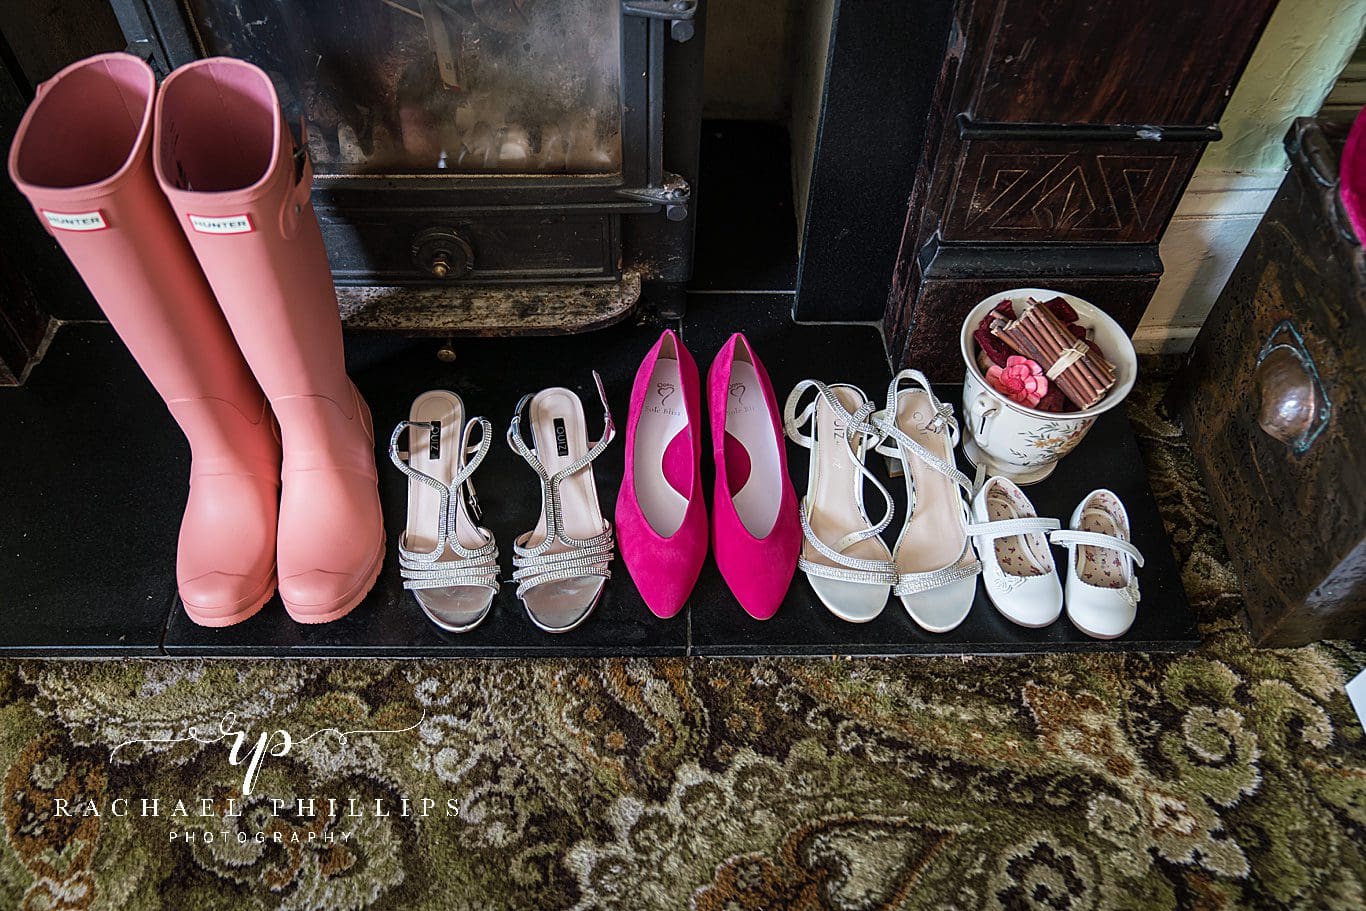 the bridal footwear collection. hunter pink wellies, to silver shoes along with dainty flower girls little shoes.